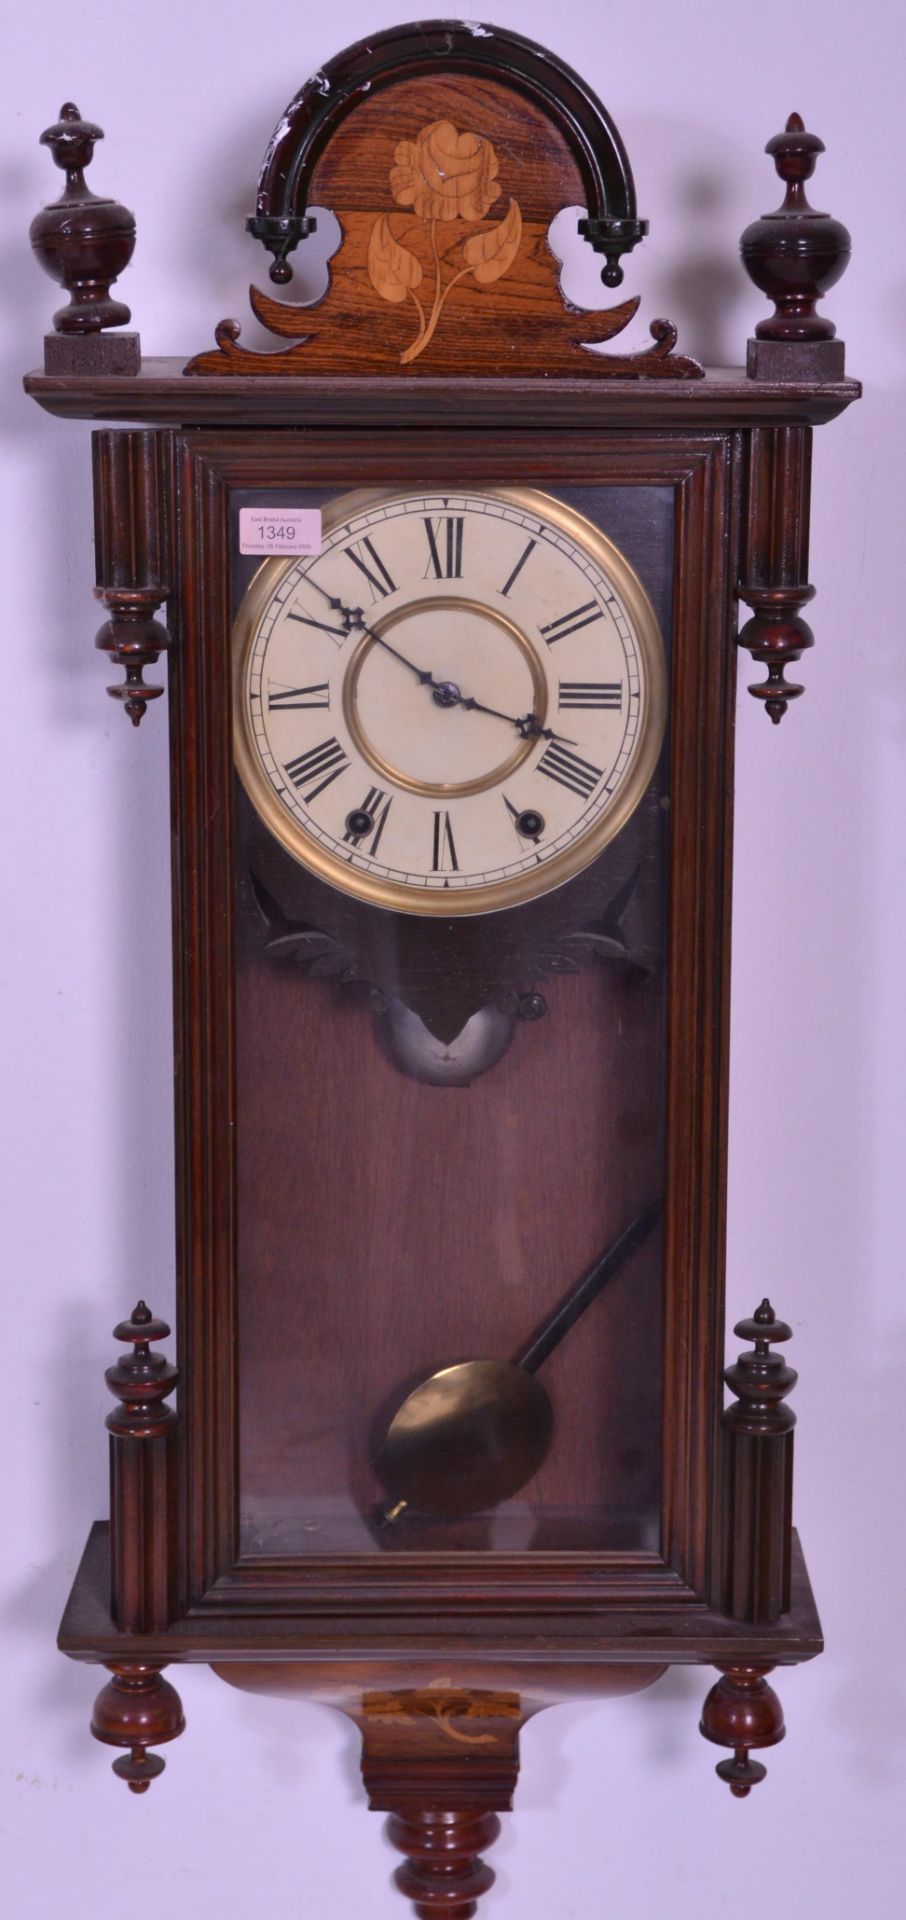 An early 20th century mahogany cased Vienna regulator wall clock complete with pendulum and